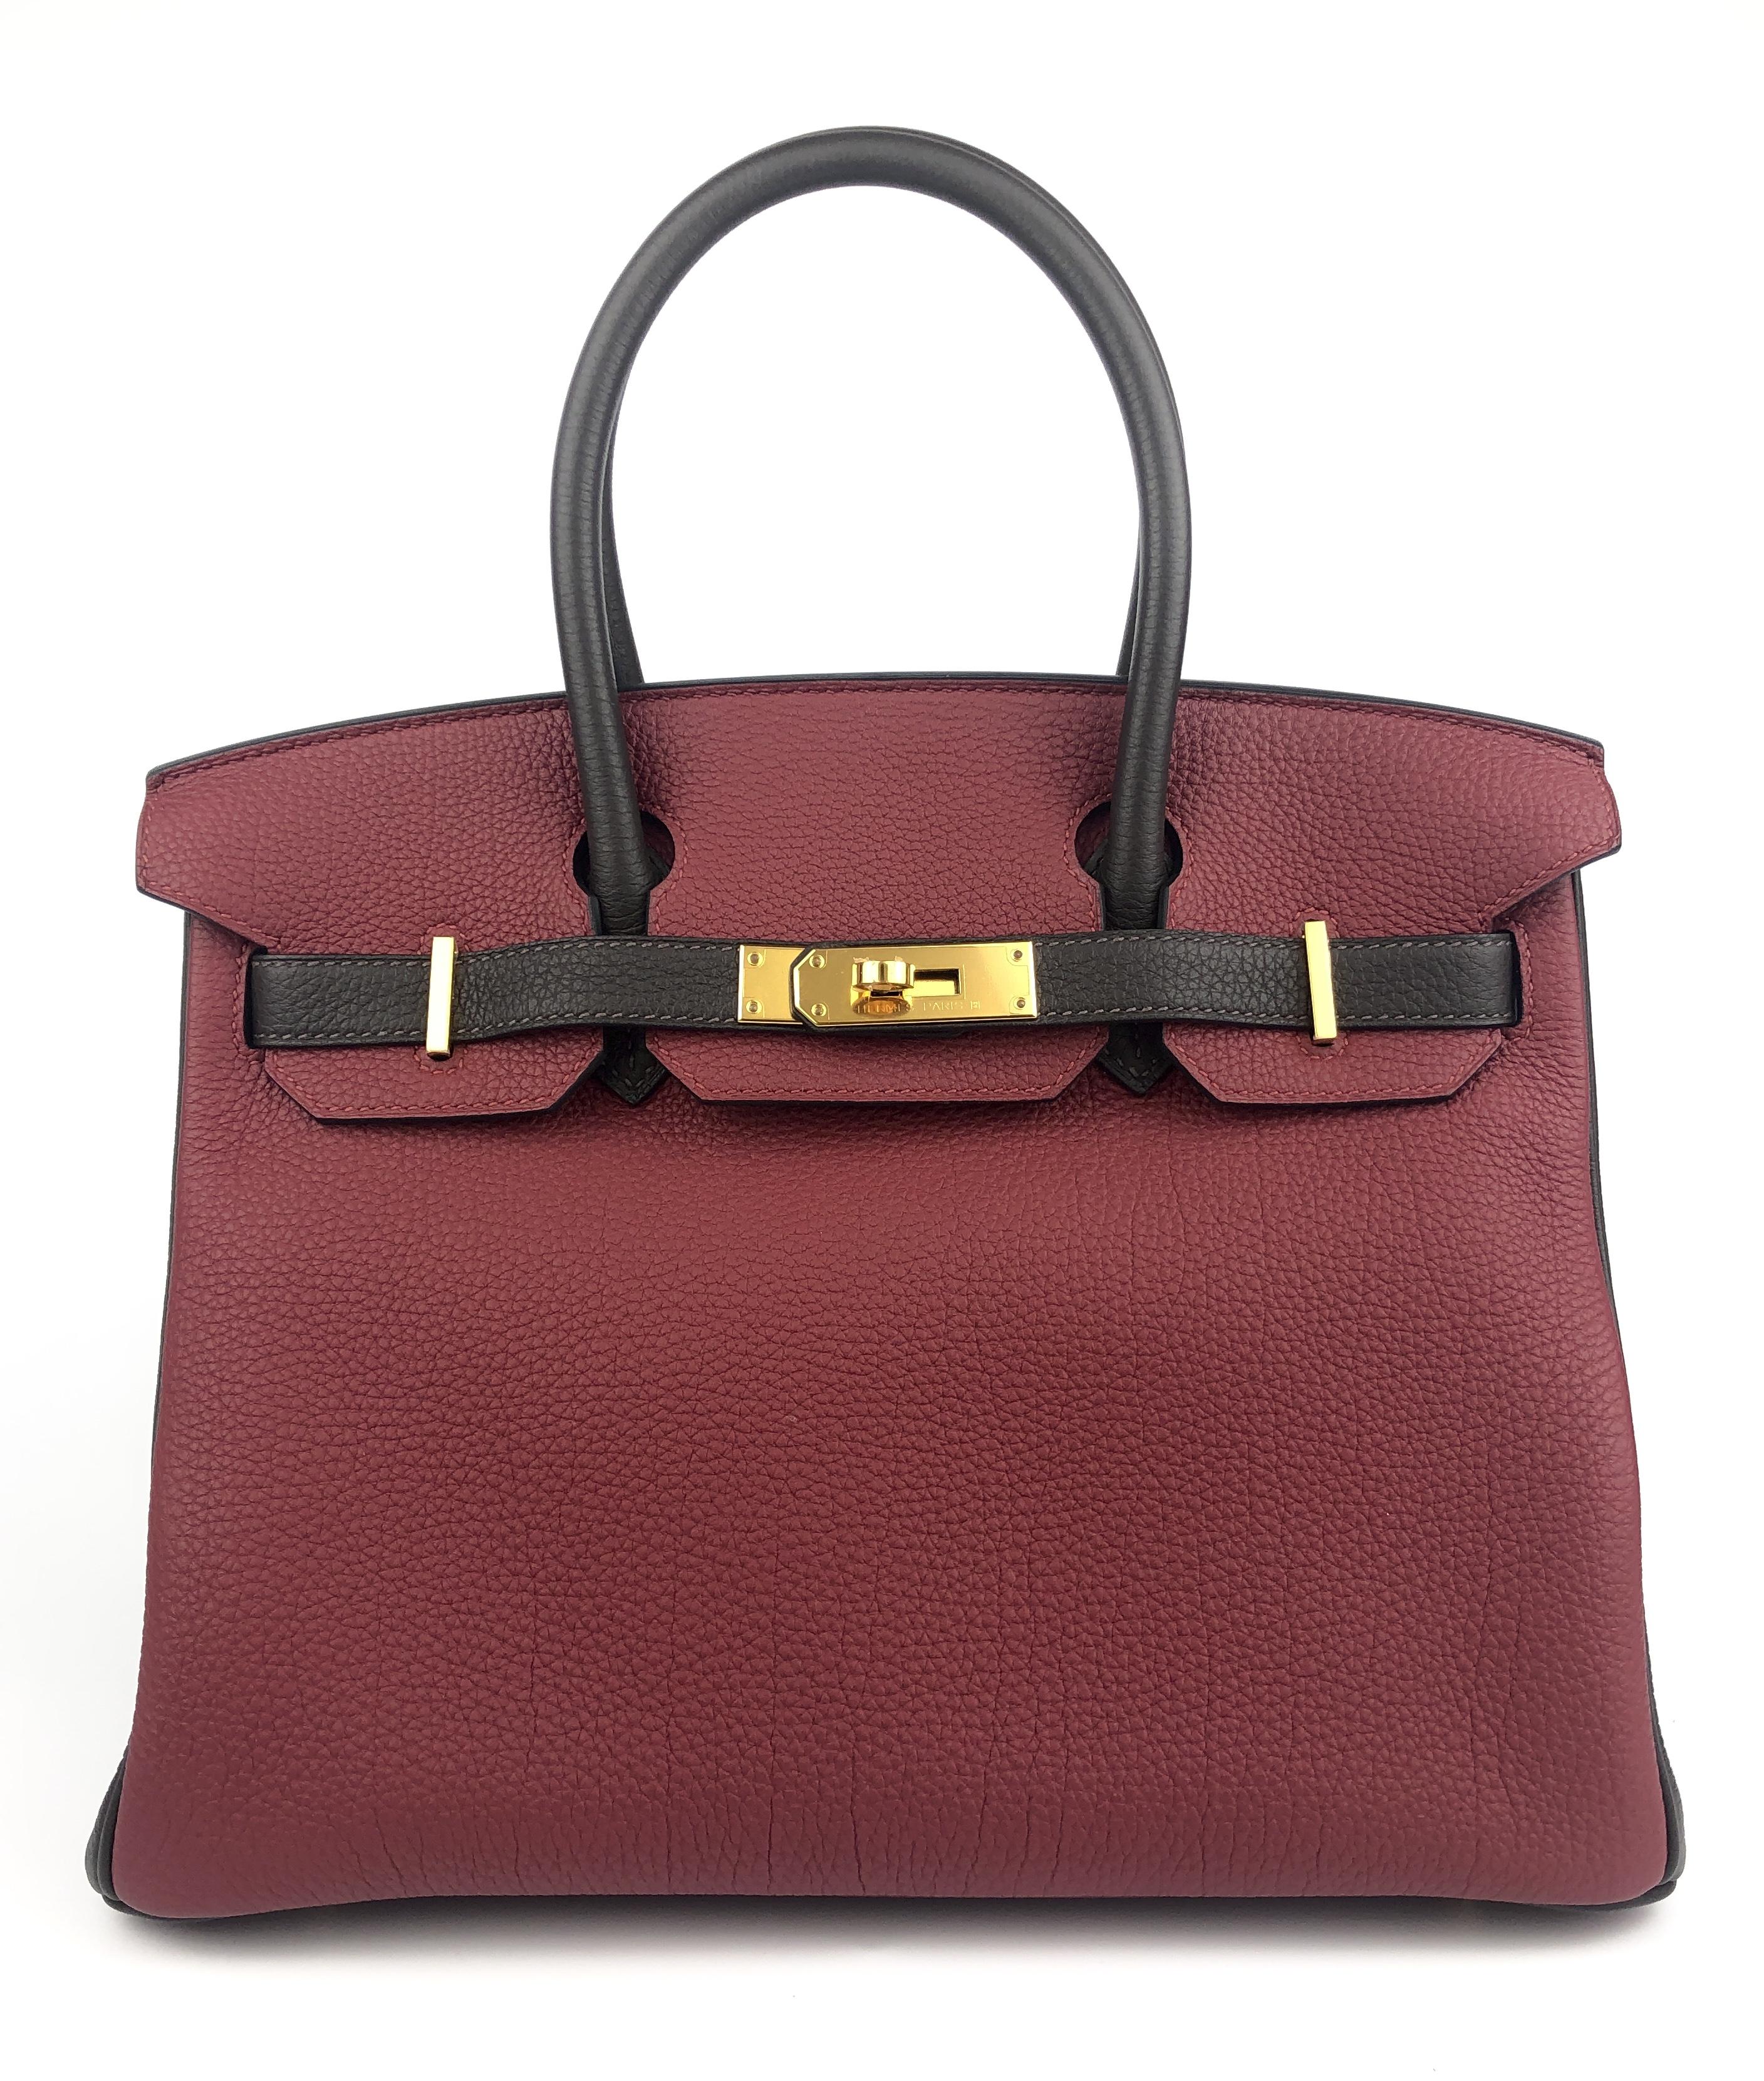 Absolutely Stunning 1 of 1 HSS Special Order Hermes Birkin 30 Rouge Grenat & Ebene Brown complimented by Gold Hardware. Like New with all plastic on hardware and feet. 2018 C Stamp. 

Shop with Confidence from Lux Addicts. Authenticity Guaranteed! 